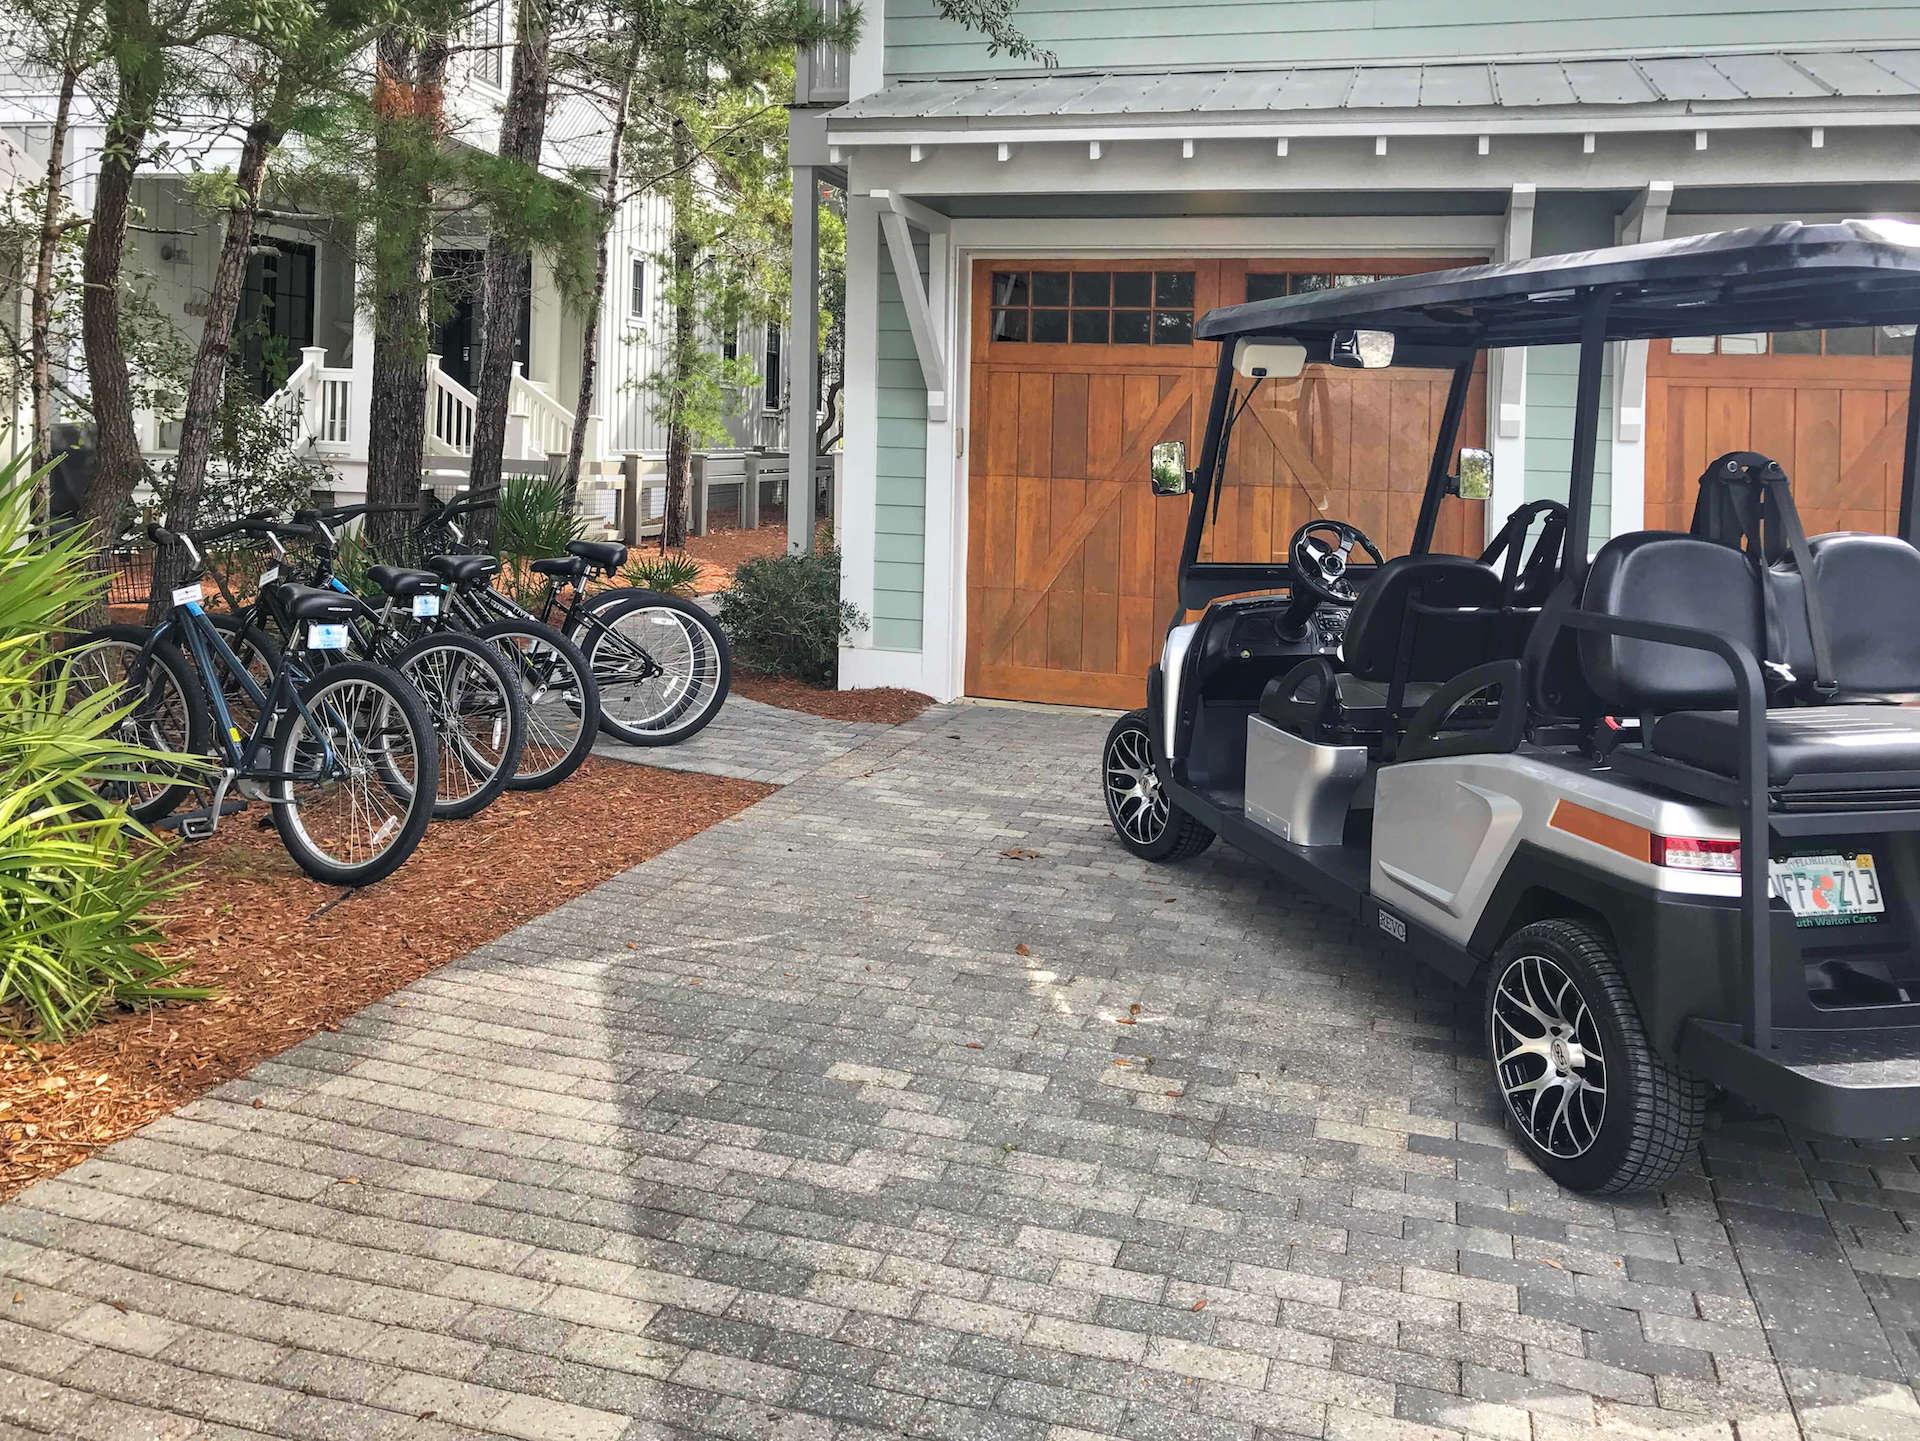 Complimentary use of 5 Taxi bikes and a 6 seater golf cart available for exploring Watercolor. This is the best way to get around!